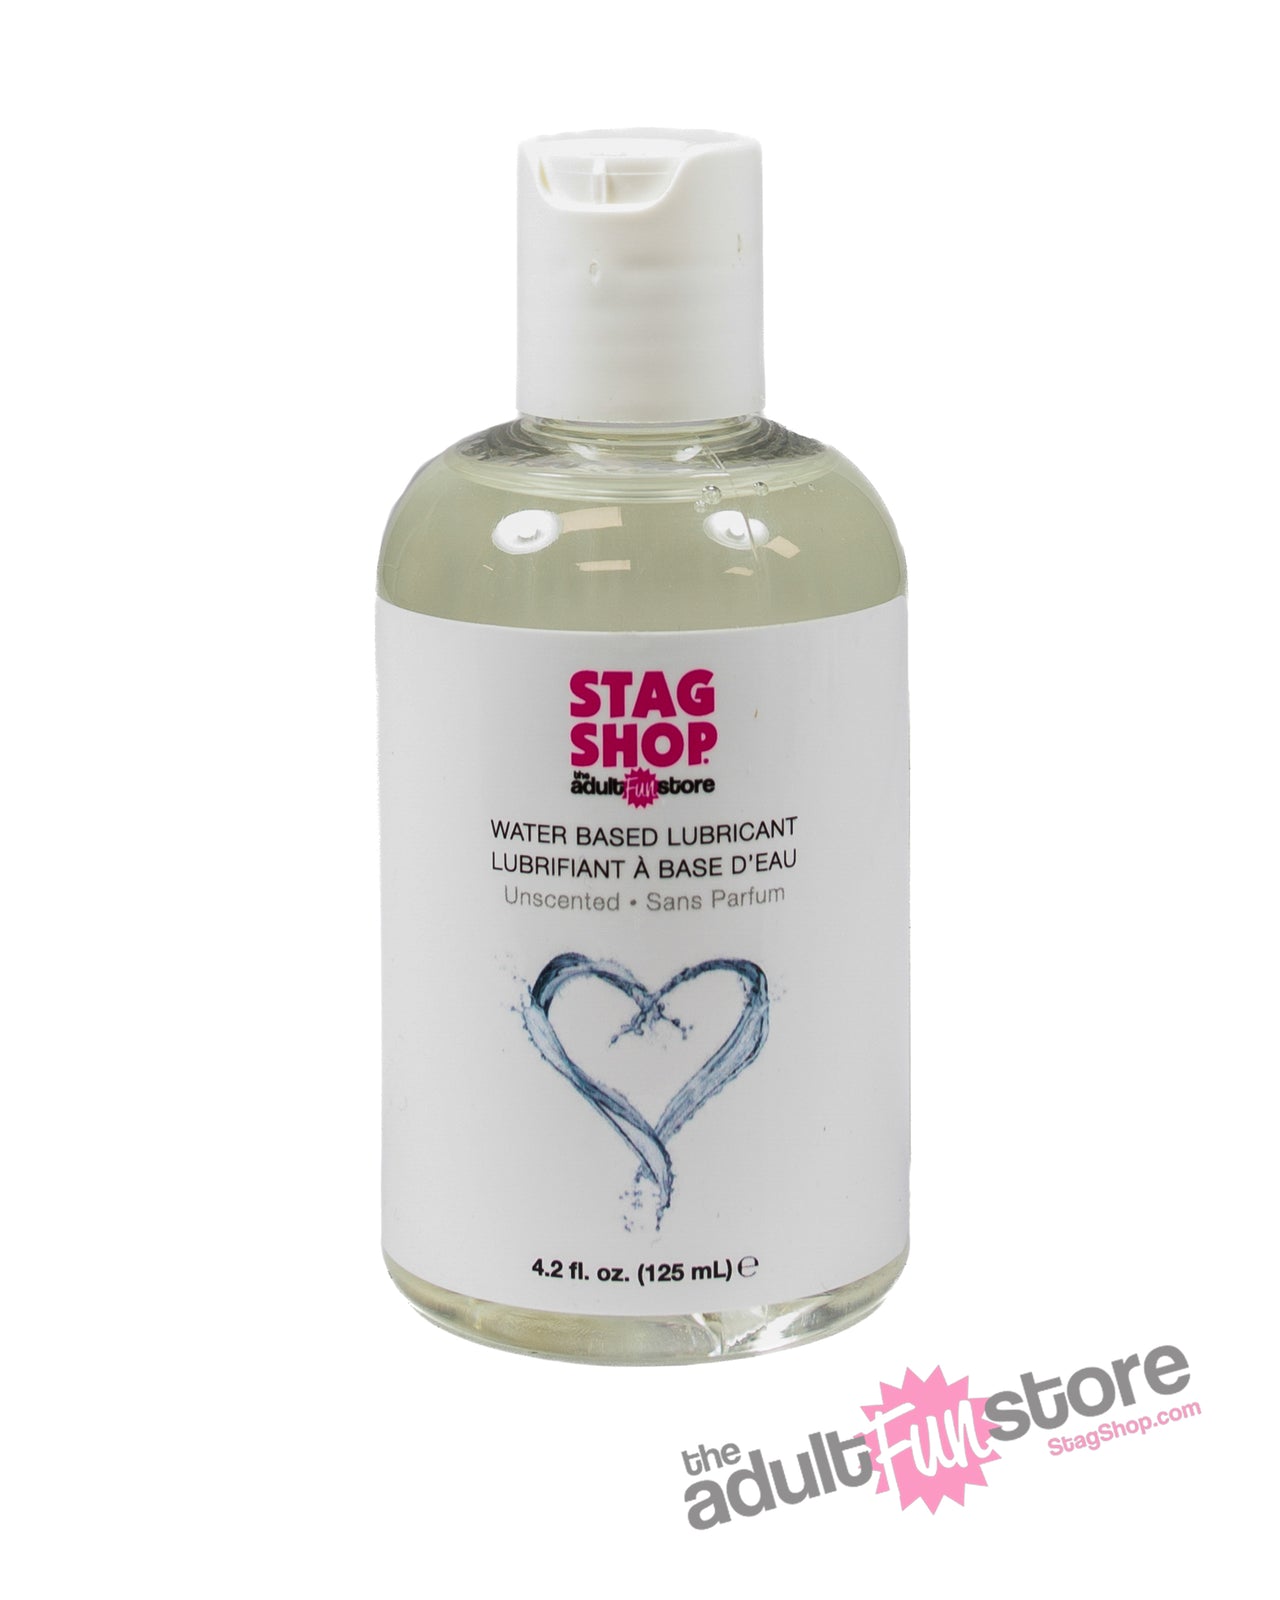 Stag Shop - Aqua Water Based Lube - Varying Sizes - Stag Shop